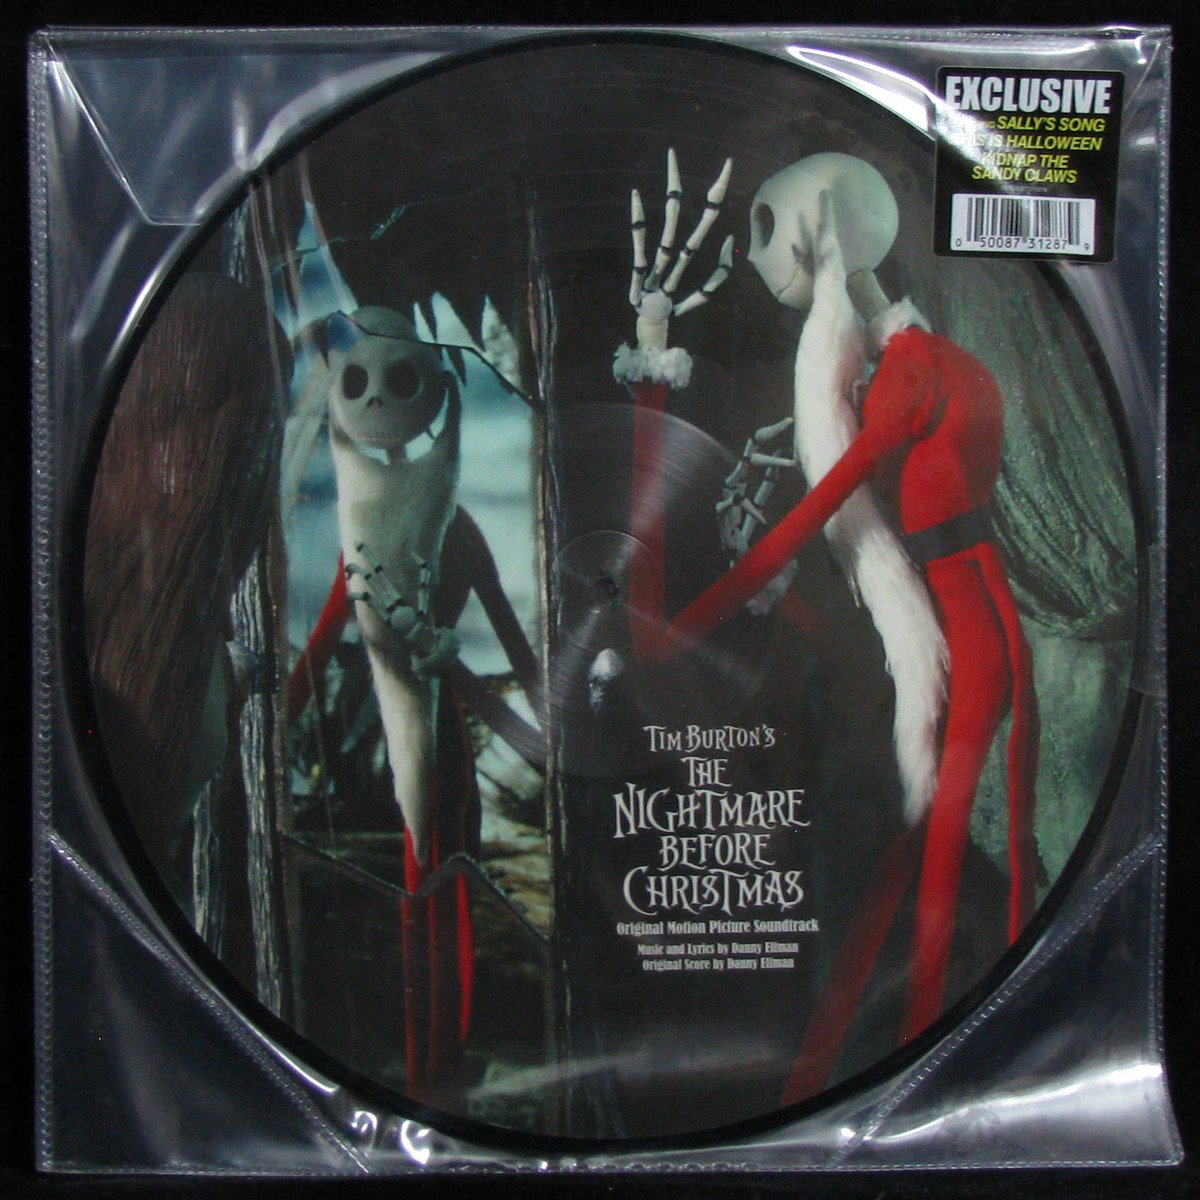 Nightmare Before Christmas (Original Motion Picture Soundtrack)